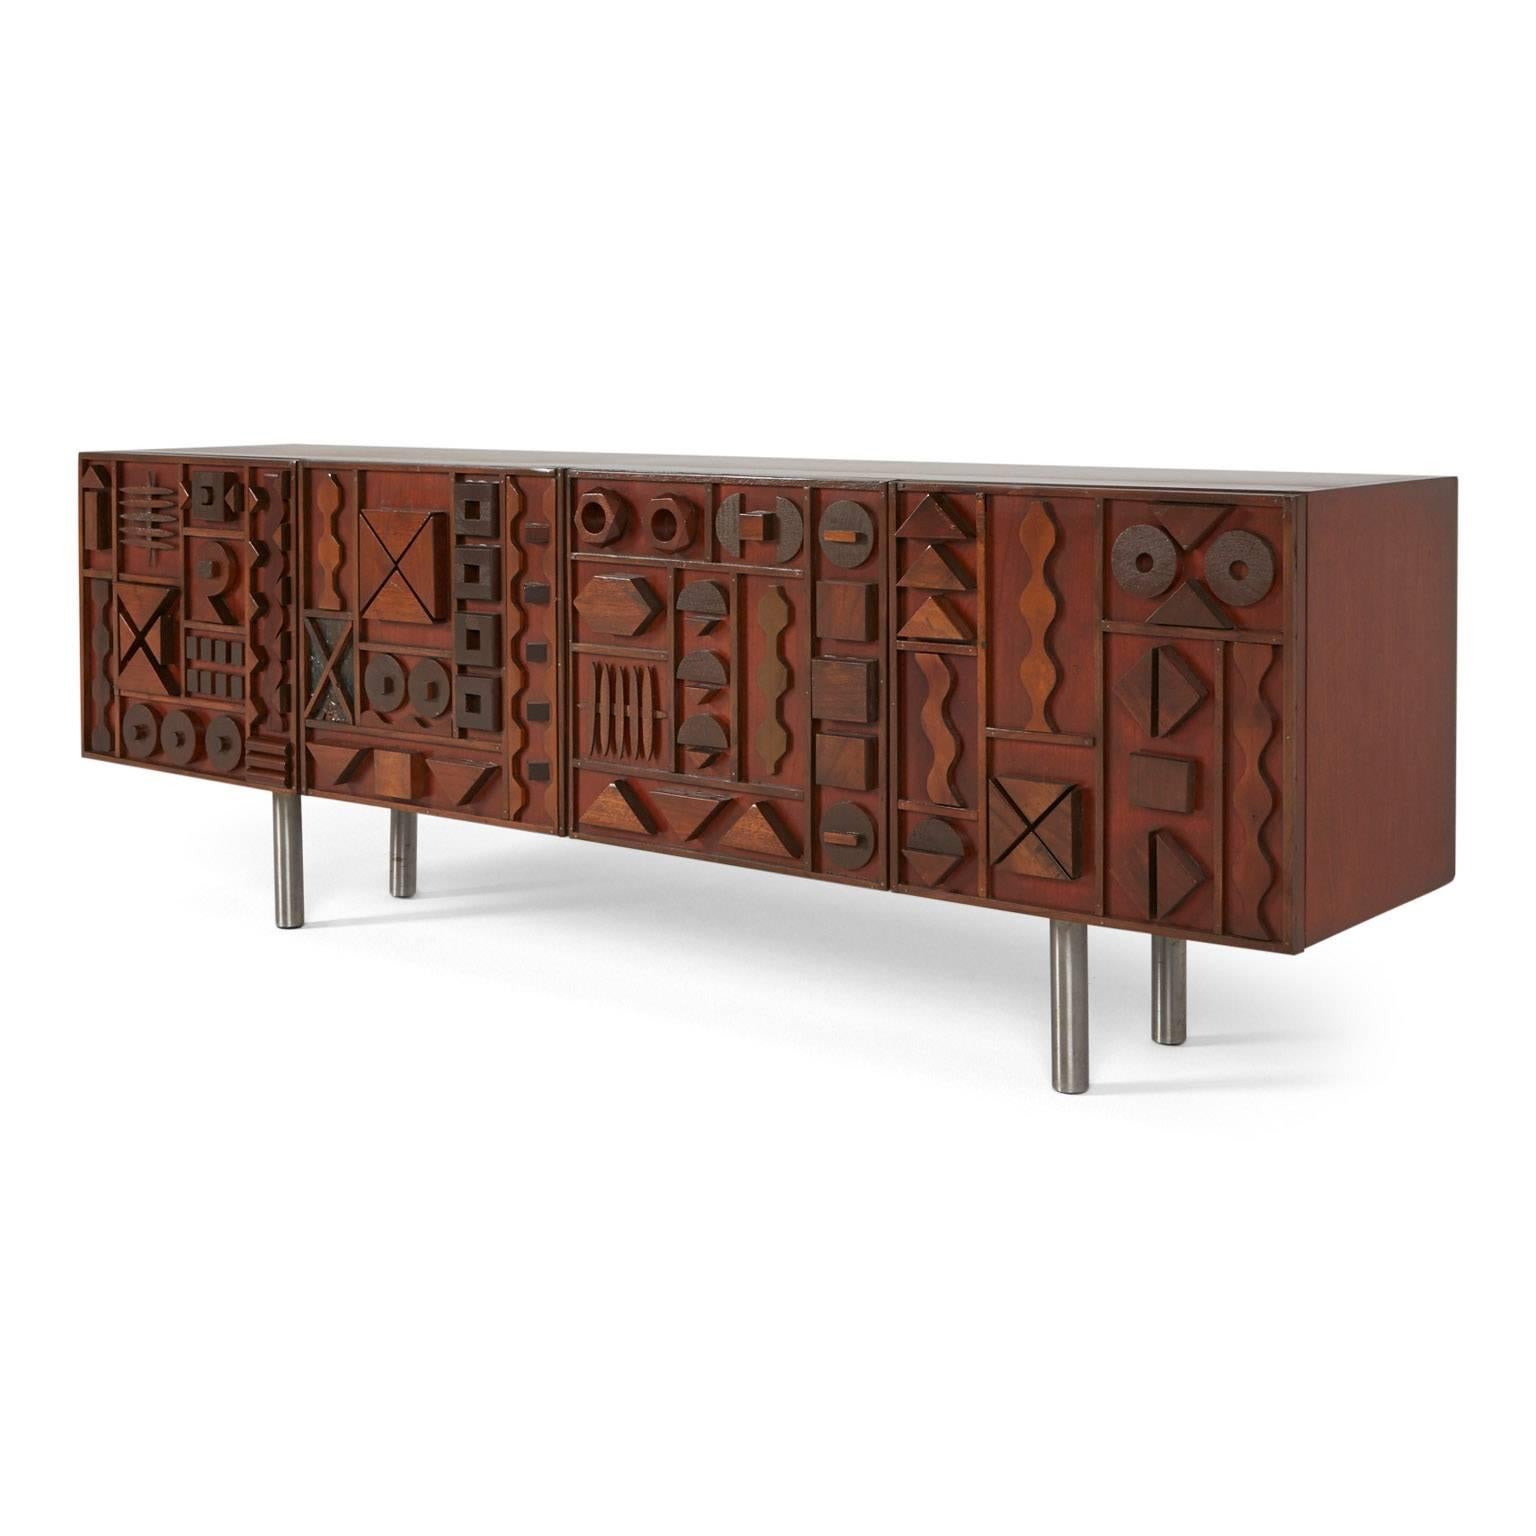 Custom handcrafted Brutalist credenza designed and crafted by Lou Ramirez. Embossed with emblematical abstract details and finished in a manufactured patina. Illustrative of the original designs of the Brutalist era, inspired by Mabel Hutchinson and